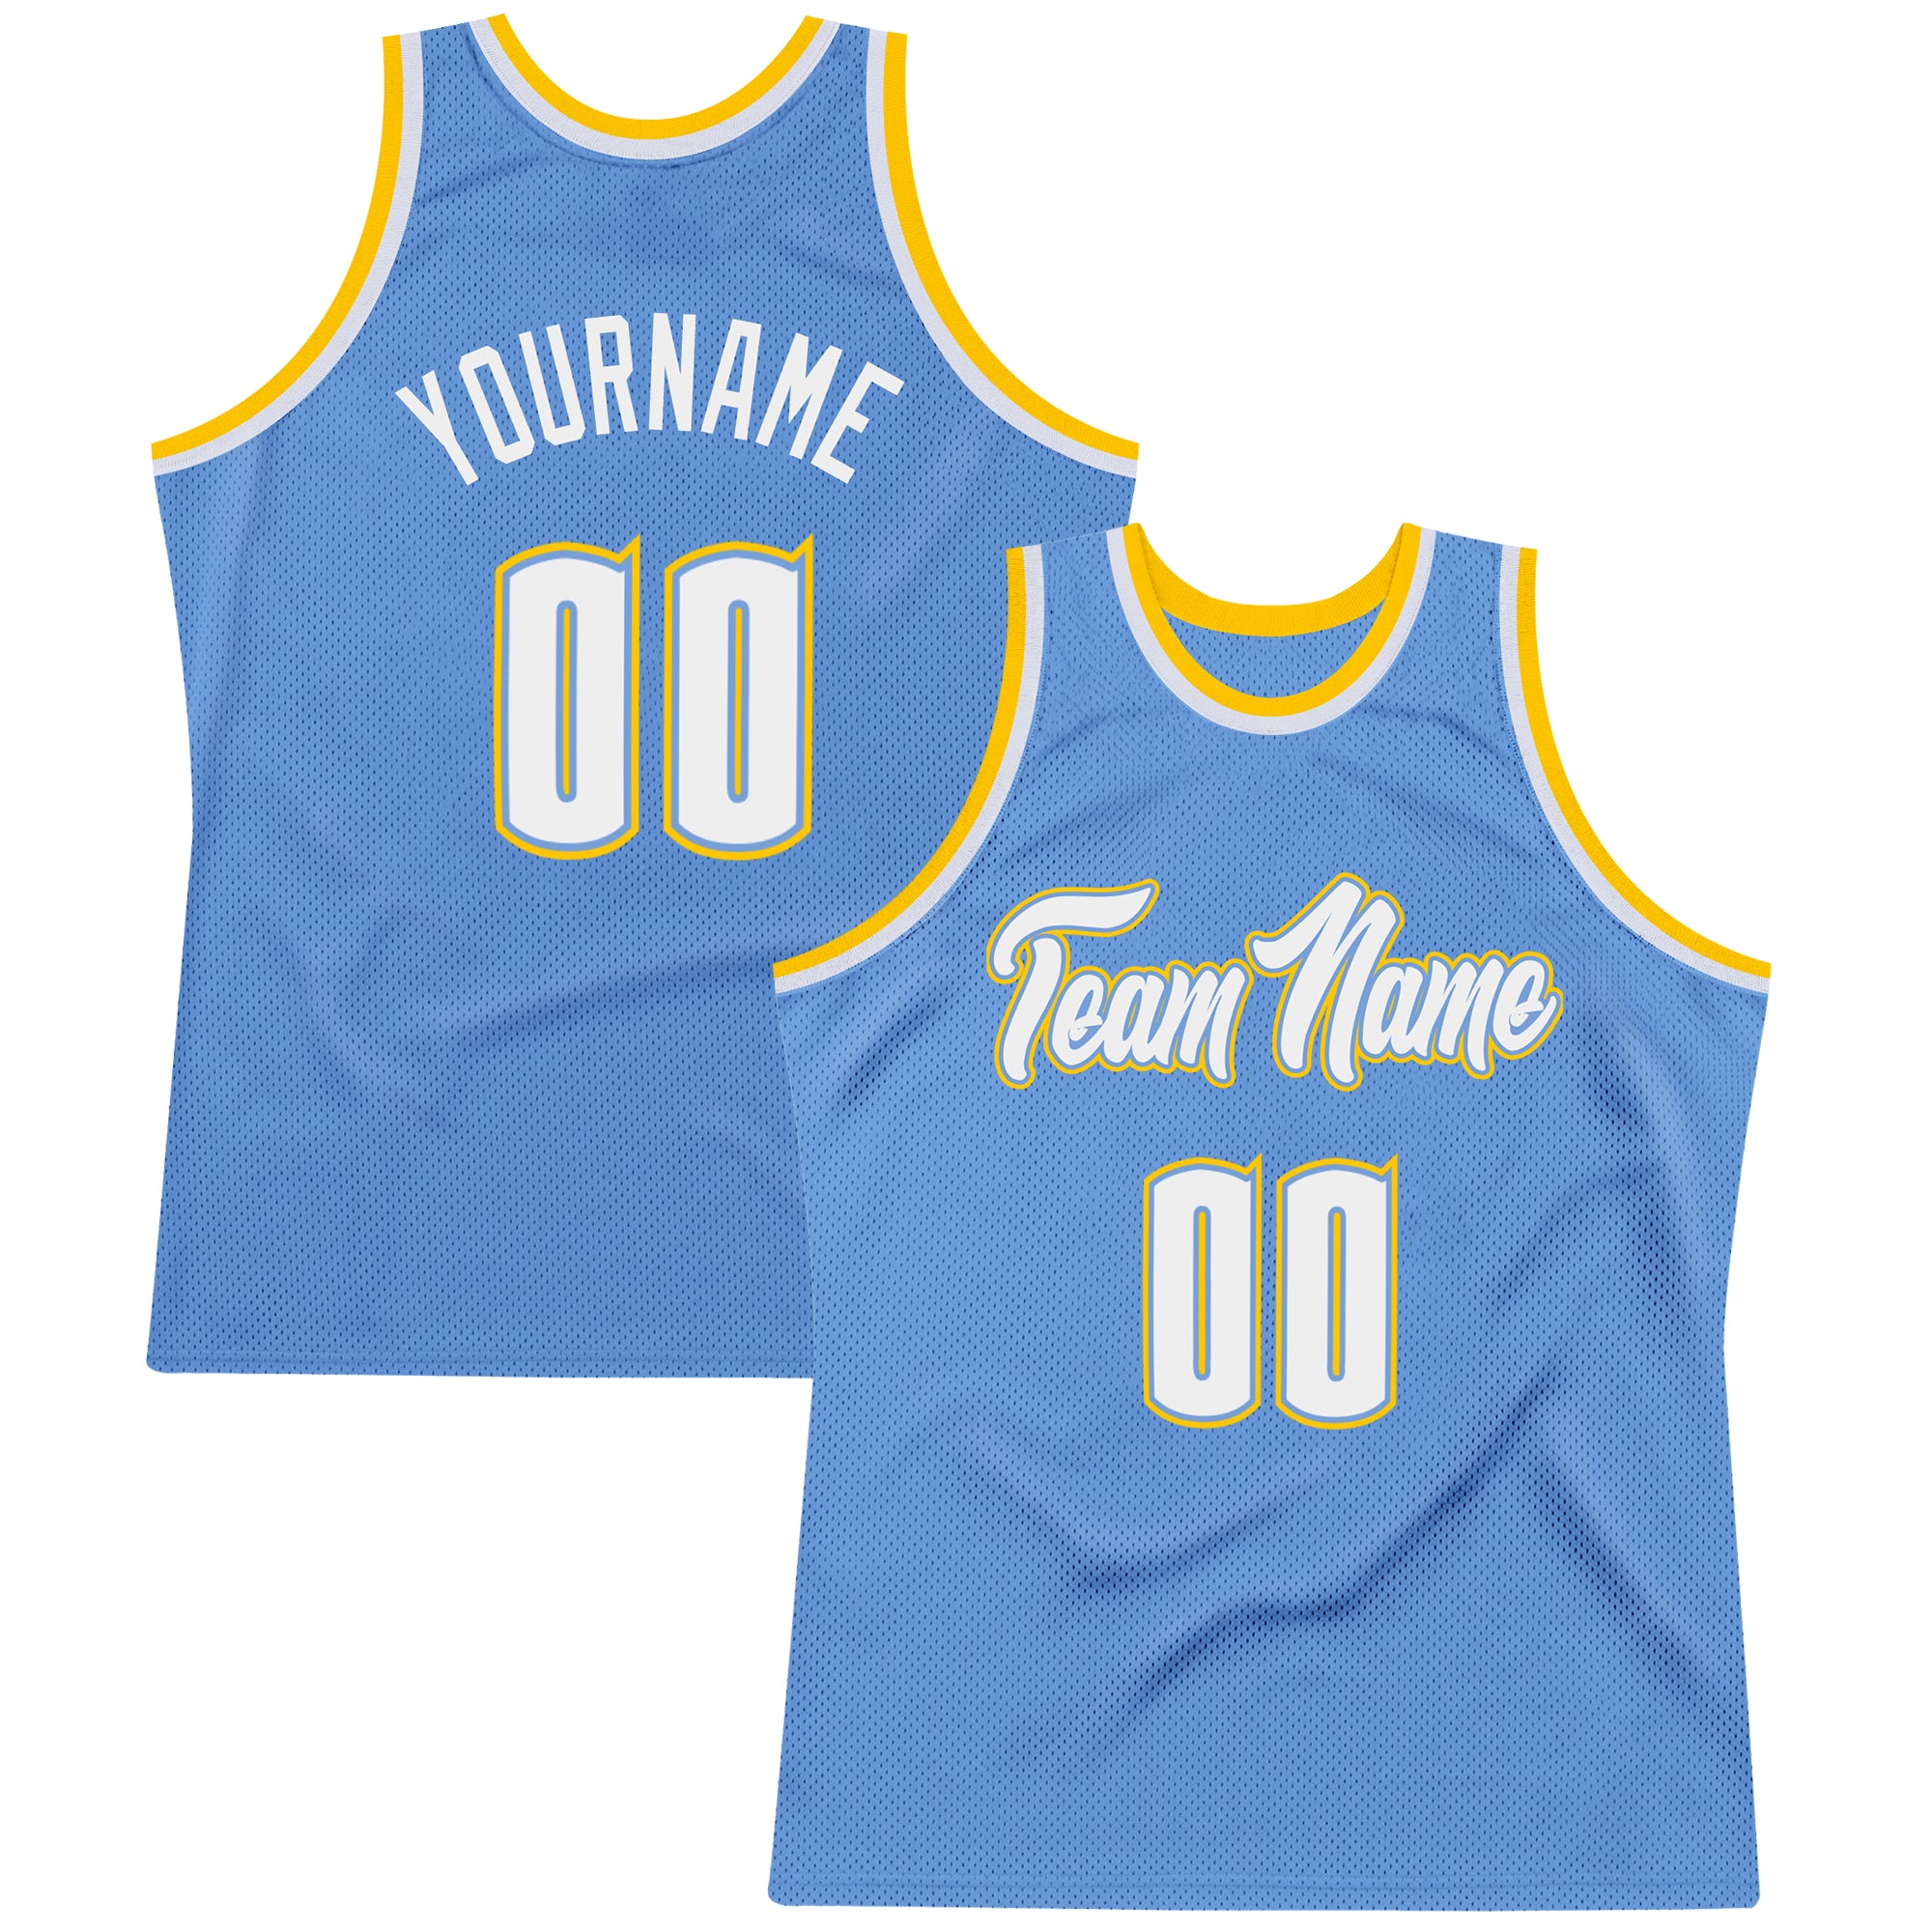 Cheap Custom Gray Teal-White Authentic Throwback Basketball Jersey Free  Shipping – CustomJerseysPro